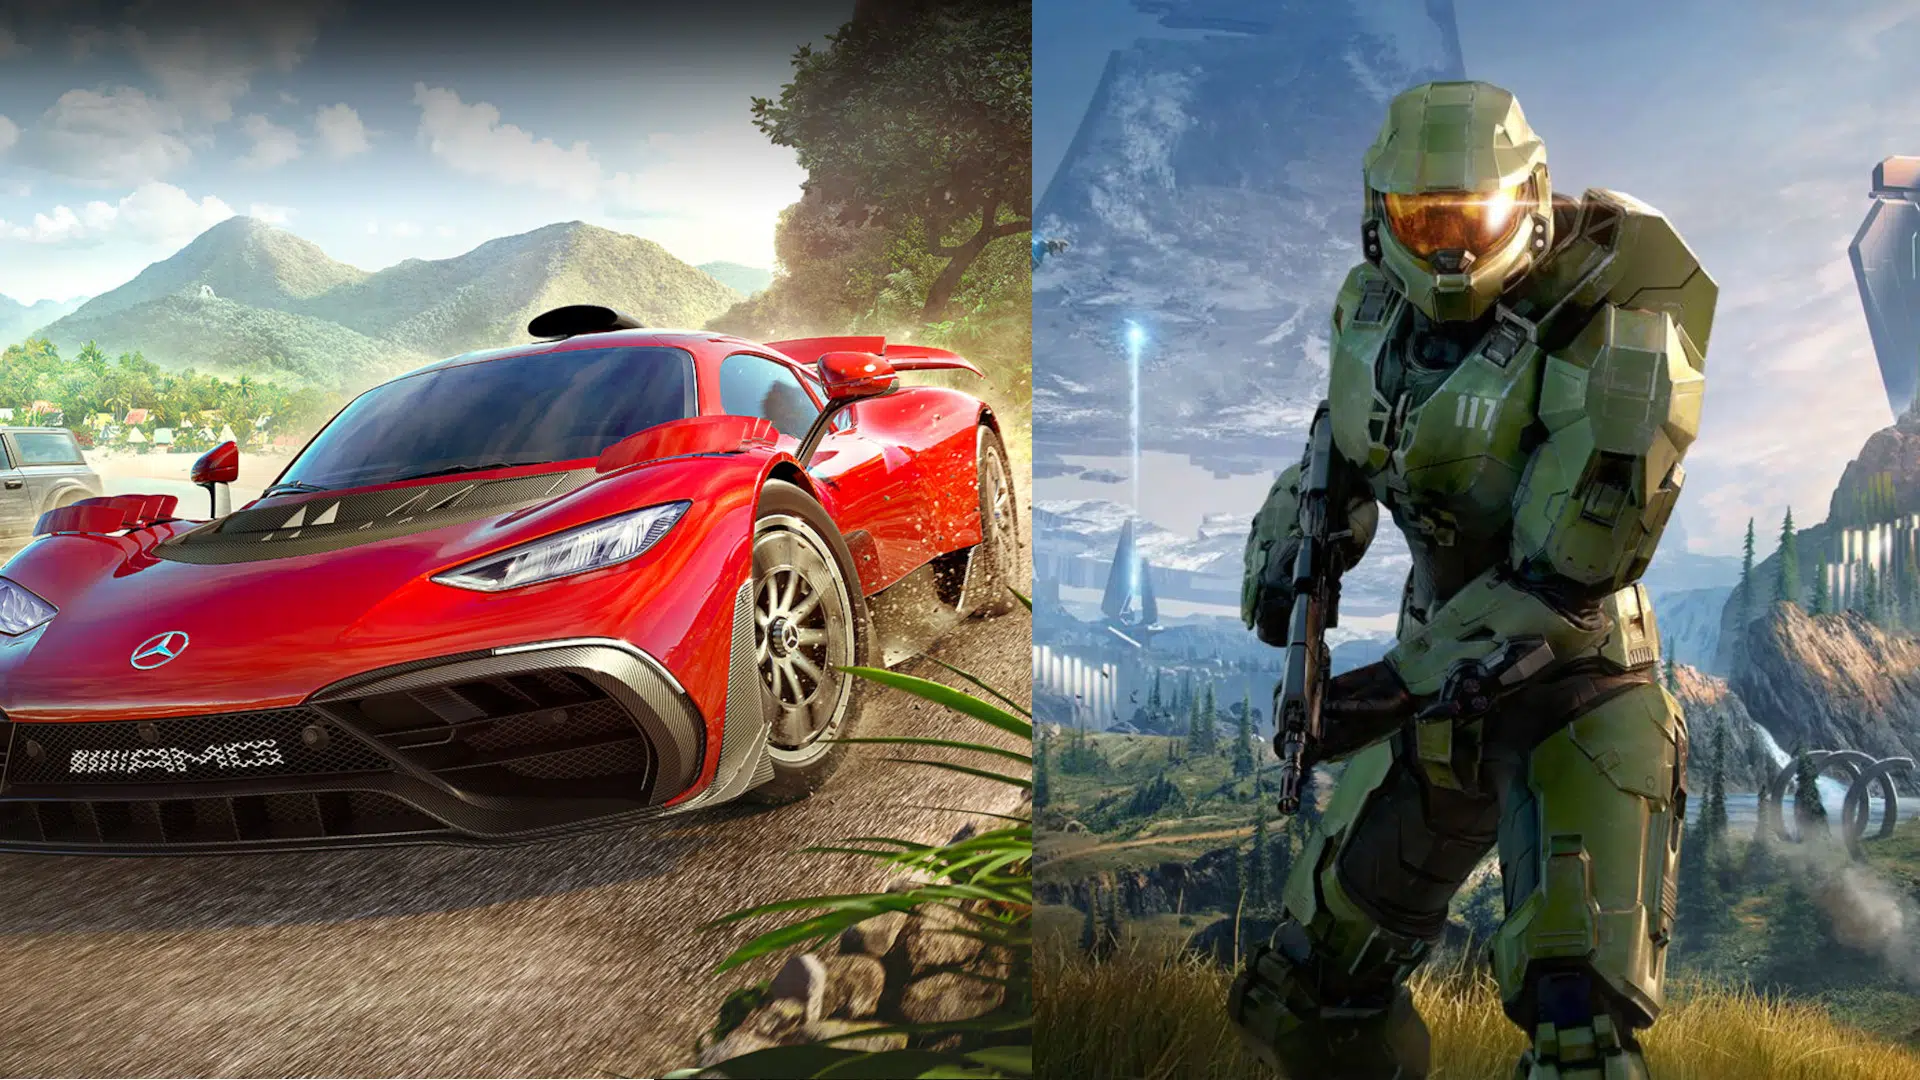 Halo Infinite Biggest Launch in Halo Franchise With Over 20 Million Players; Forza Horizon 5 18 Million